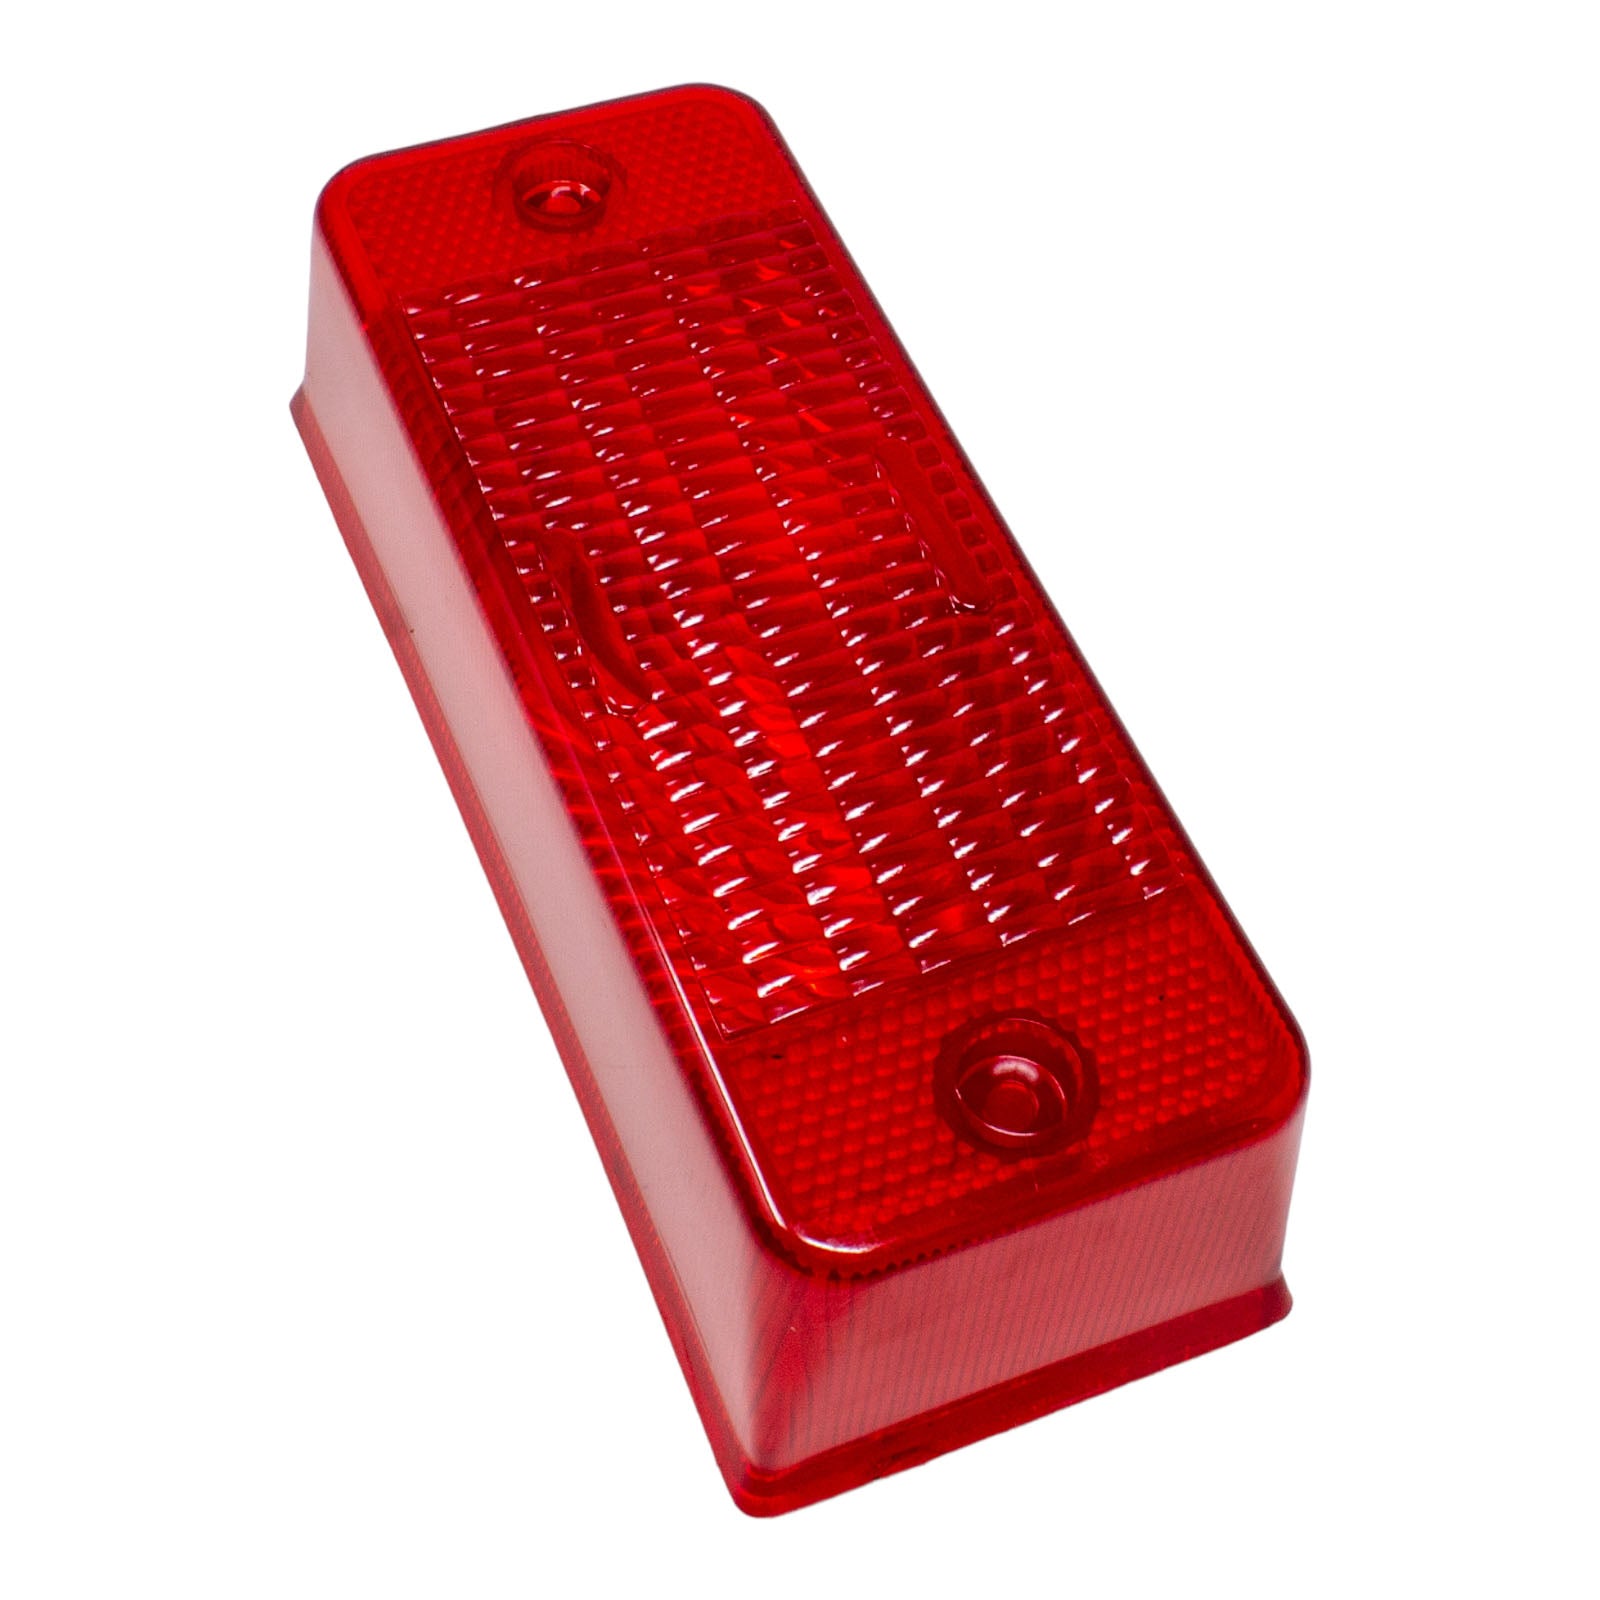 6672276, Red Tail Light Lens For Bobcat at Duraforce